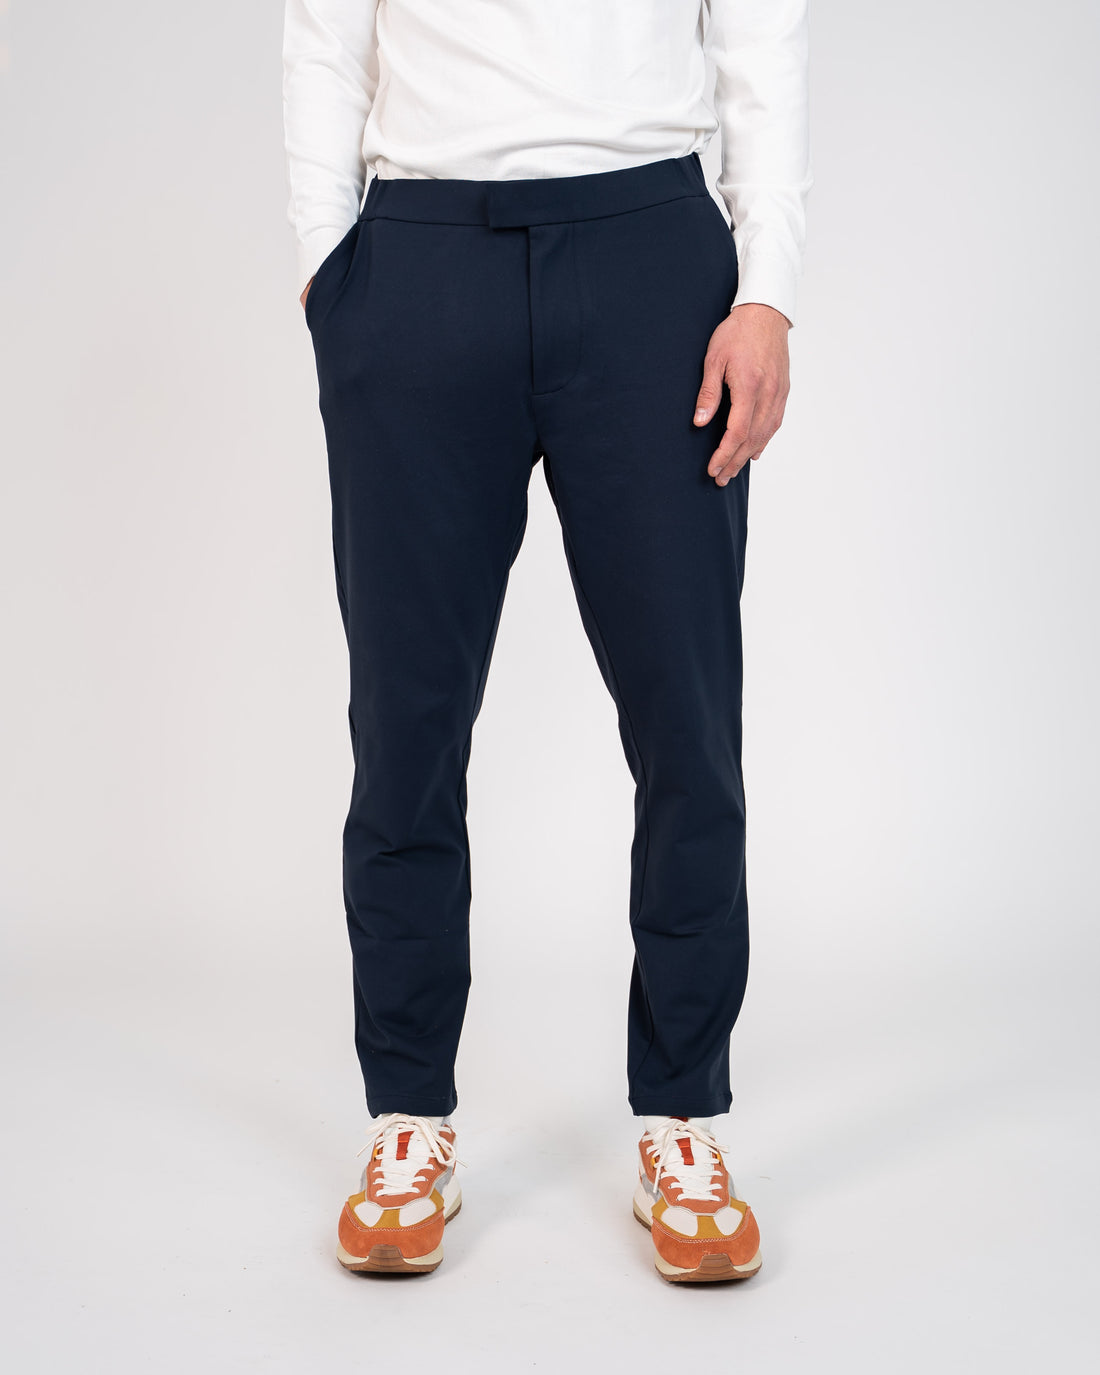 The Everyday Trouser